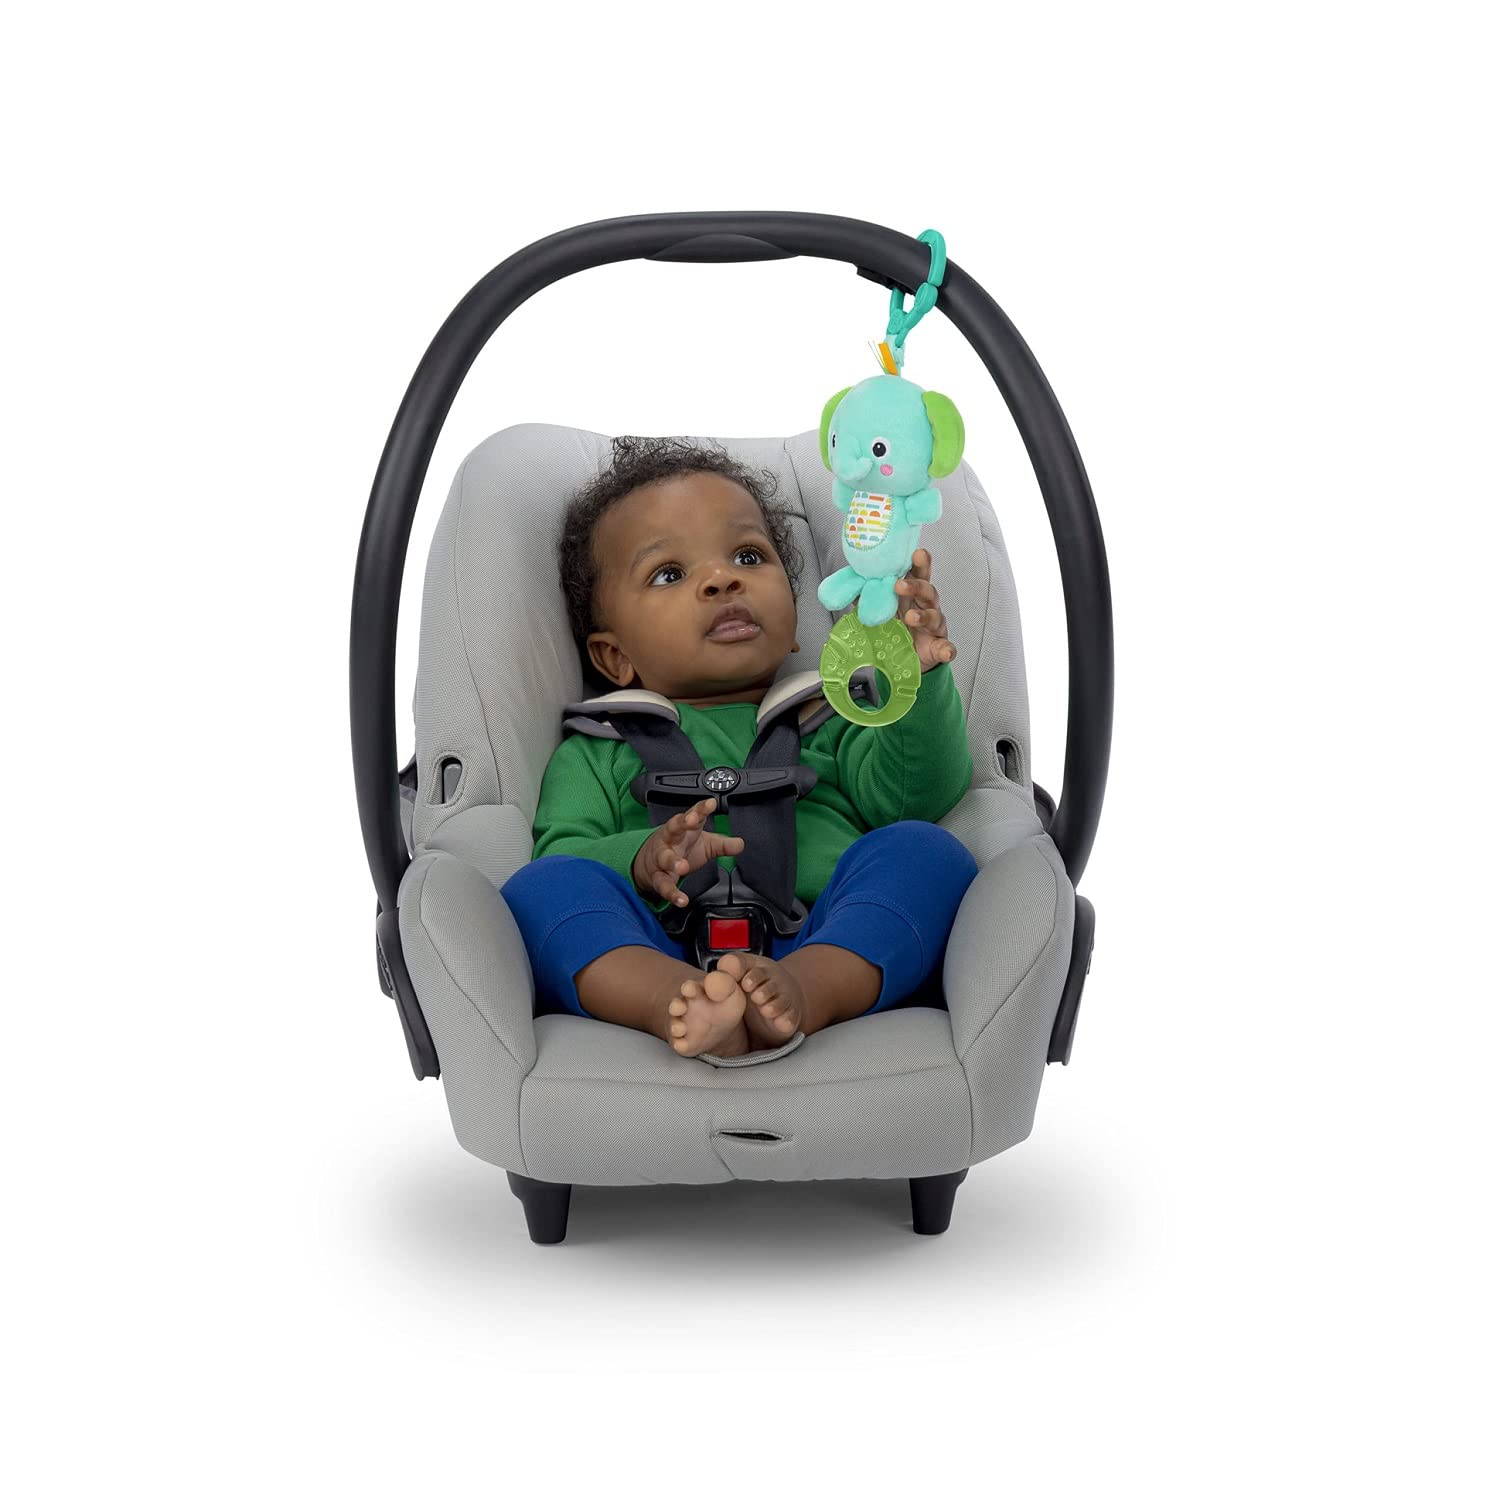 Bright Starts Tug Tunes On-The-Go Toy for Stroller and Carriers - Elephant - Unisex, Newborn +